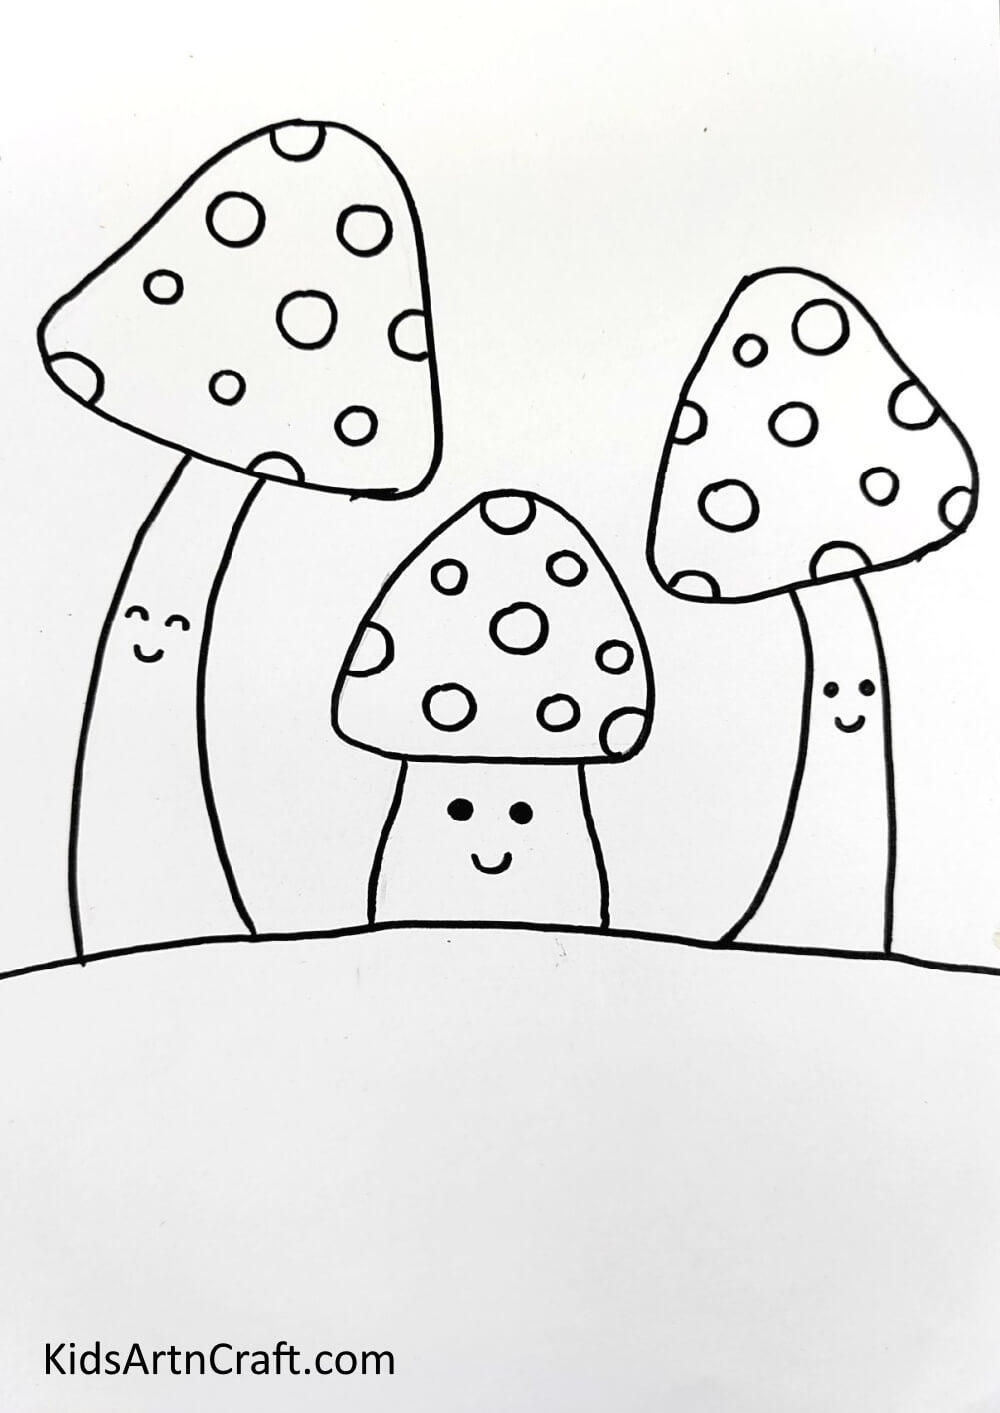 Detailing The Mushrooms How to Create a Mushroom Picture Step-by-Step for Little Ones 